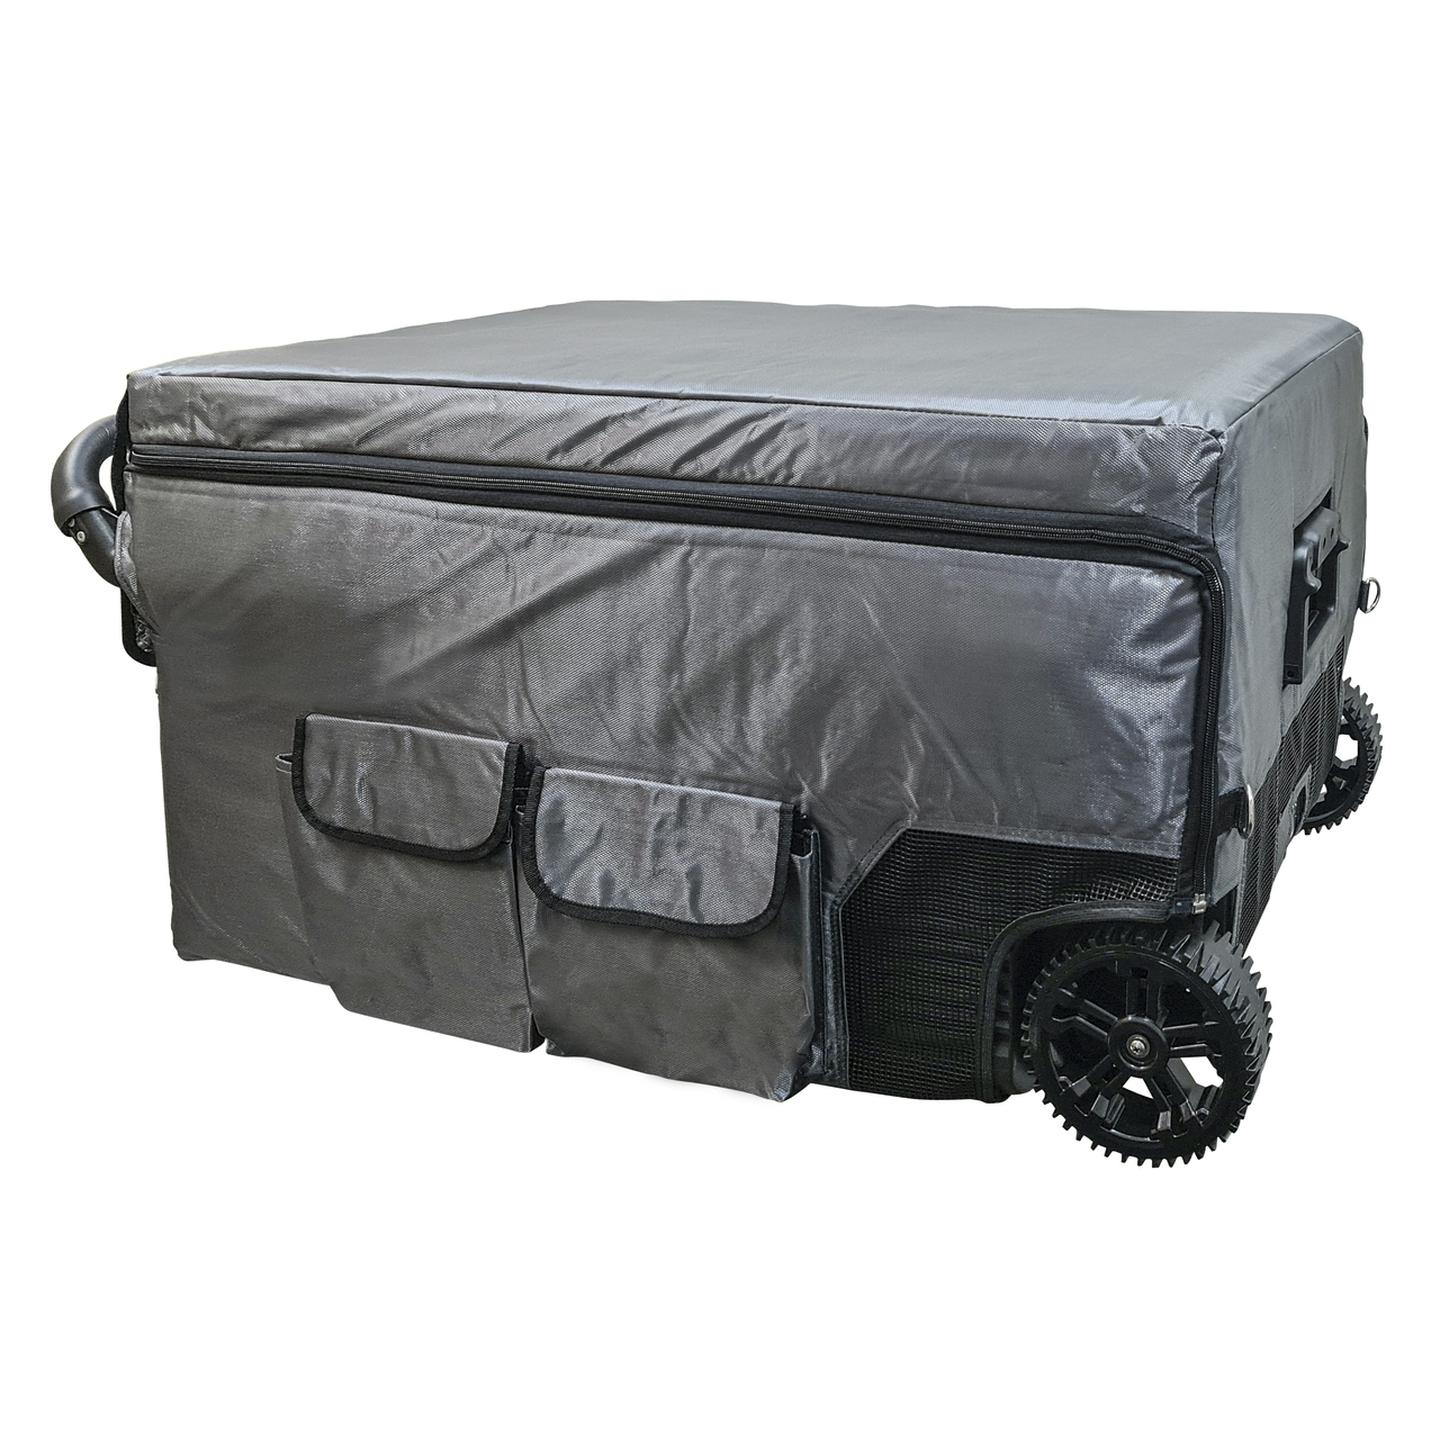 Grey Insulated Cover for 75L Brass Monkey Portable Fridge/Freezer with Wheels